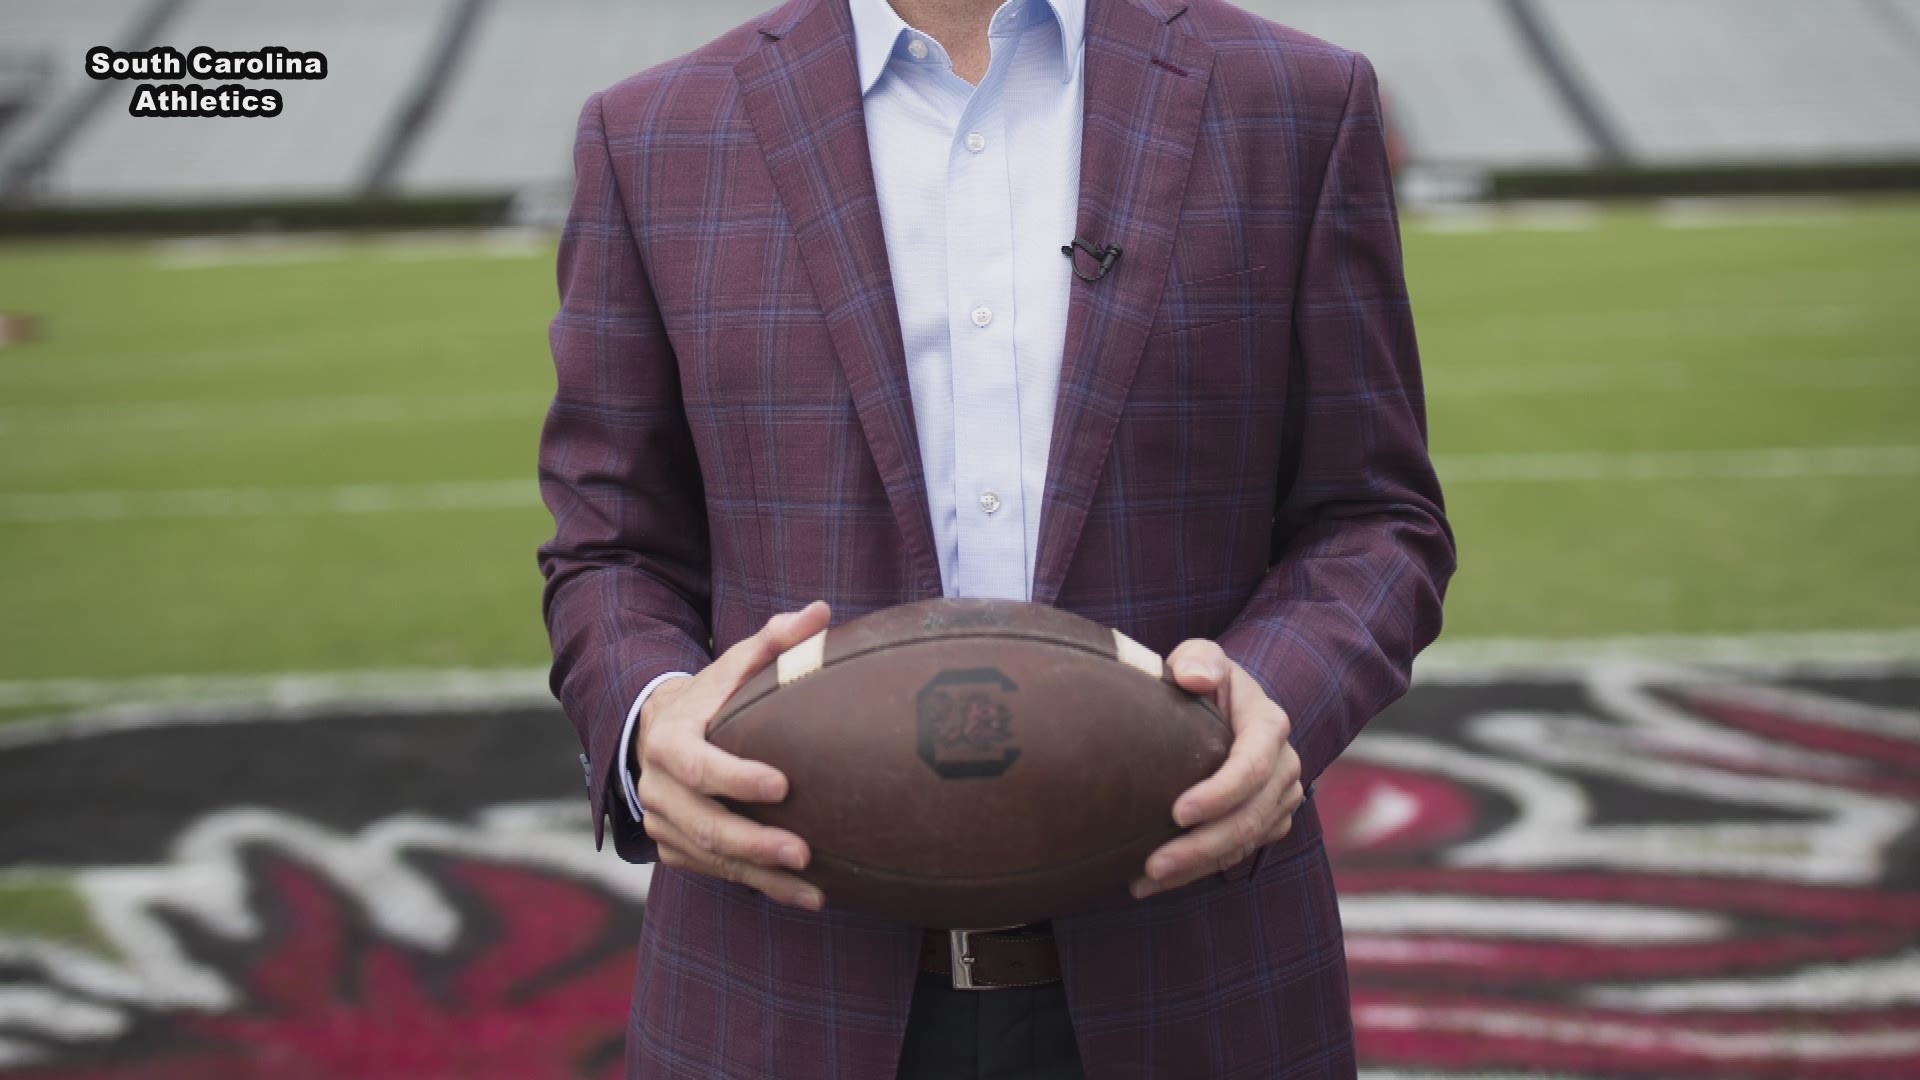 A look at Shane Beamer's first day in Columbia as the new head football coach at South Carolina.